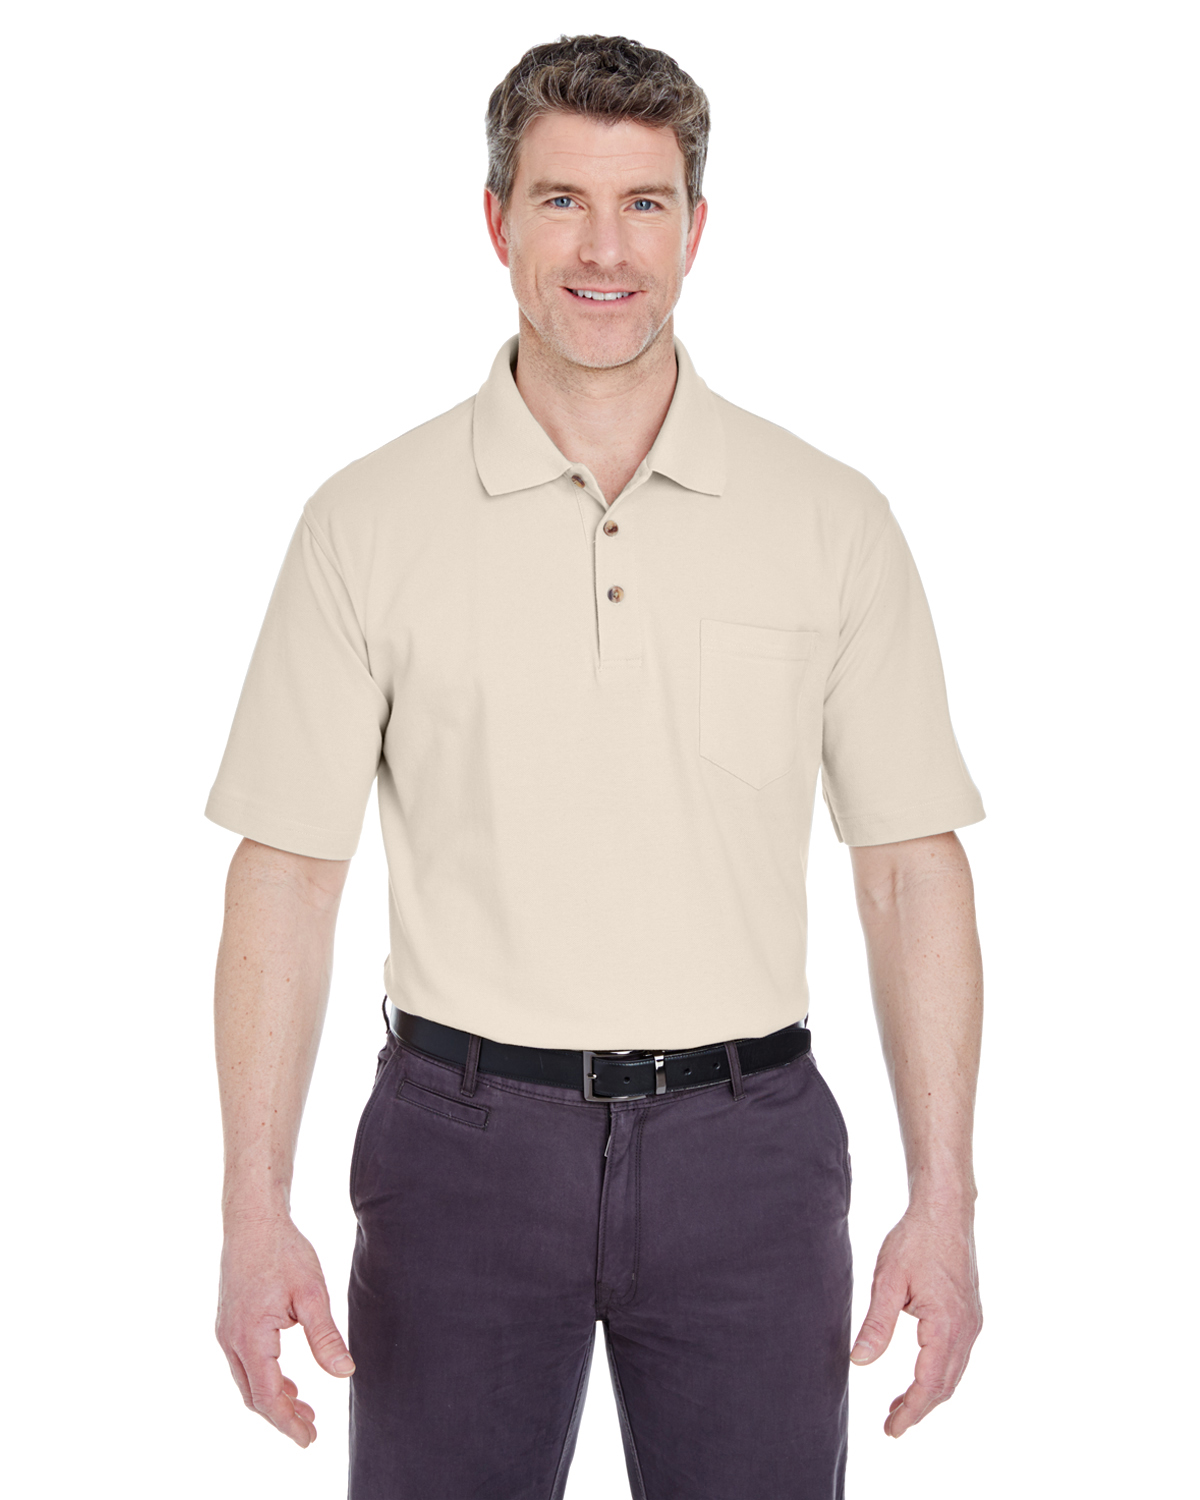 8534 UltraClub Adult Classic Piqué Polo with Pocket